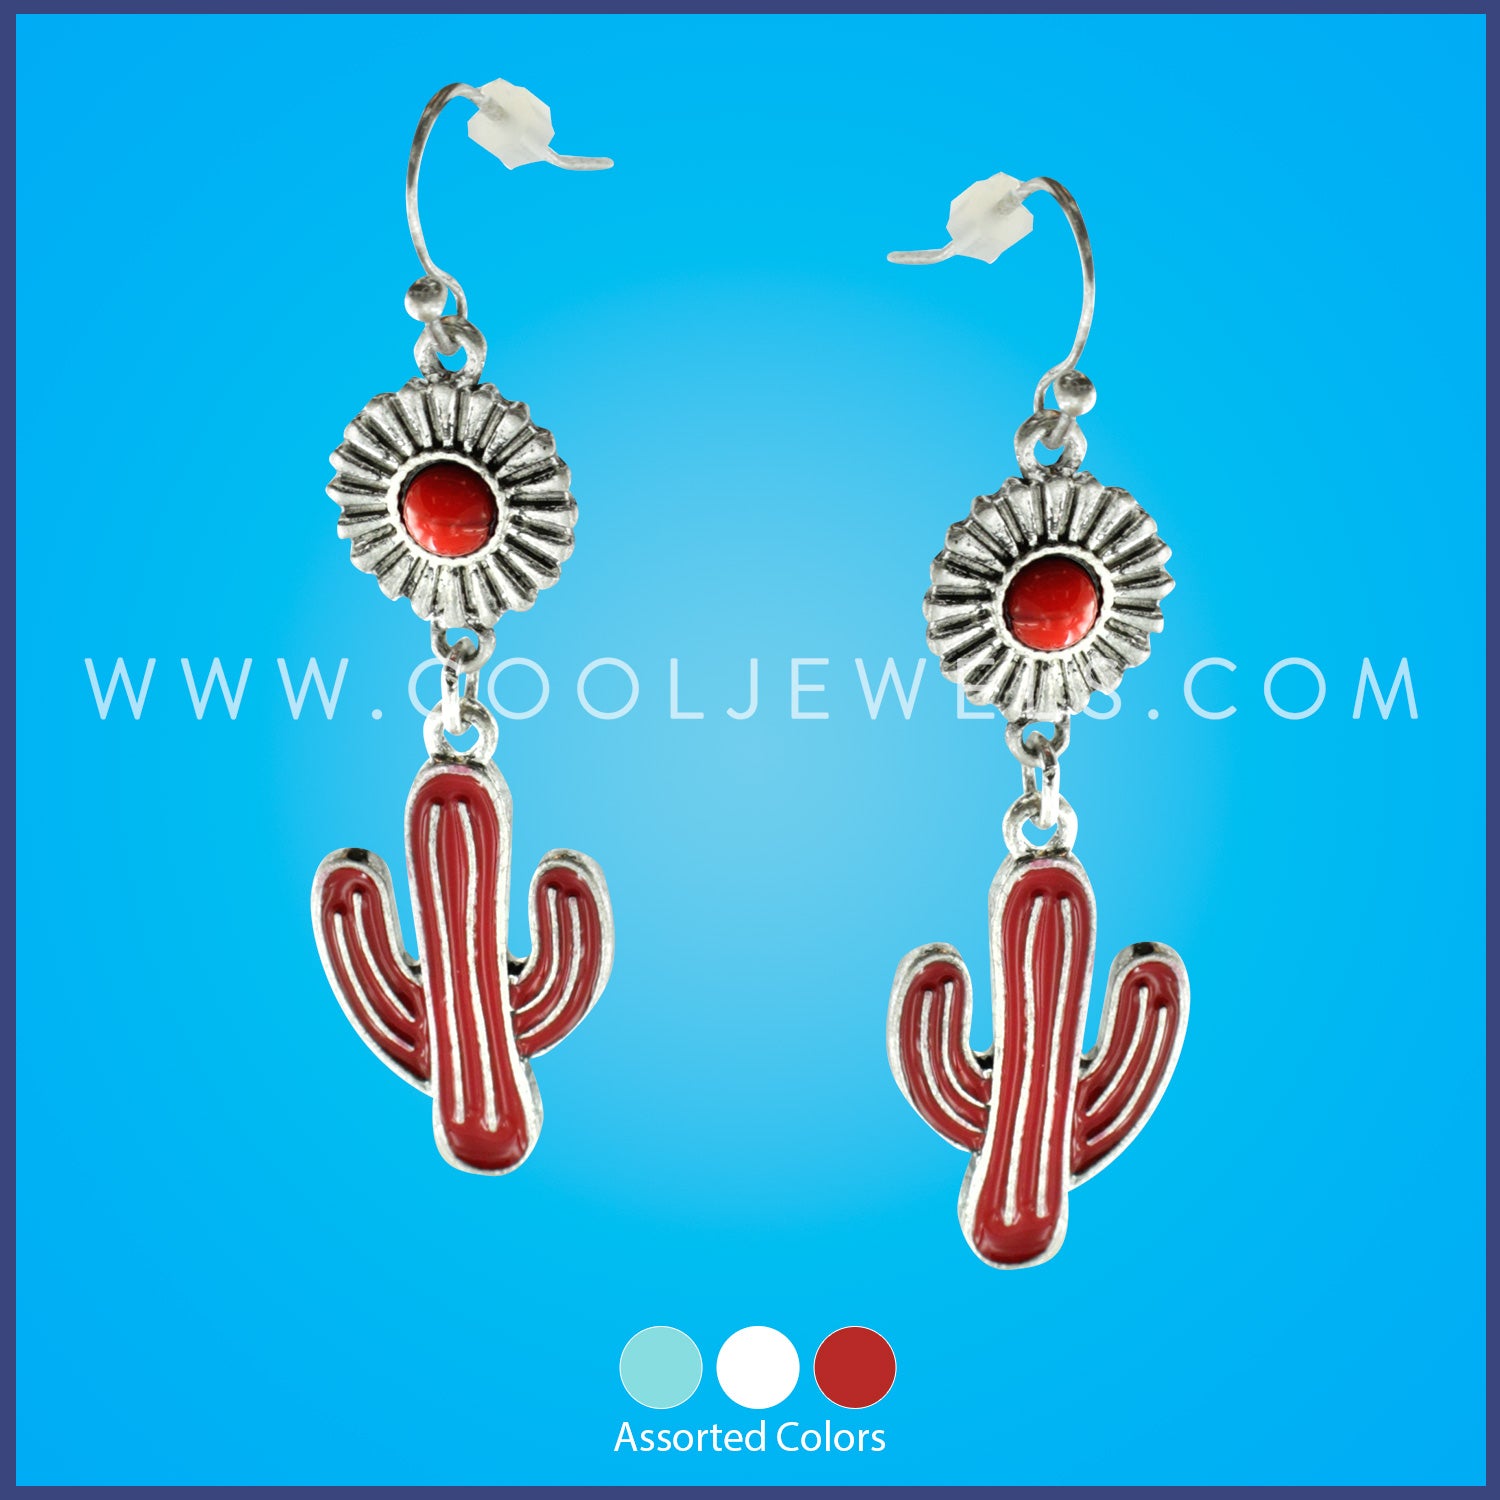 FISH HOOK EARRING WITH SUNFLOWER & CACTUS PENDANT - ASSORTED